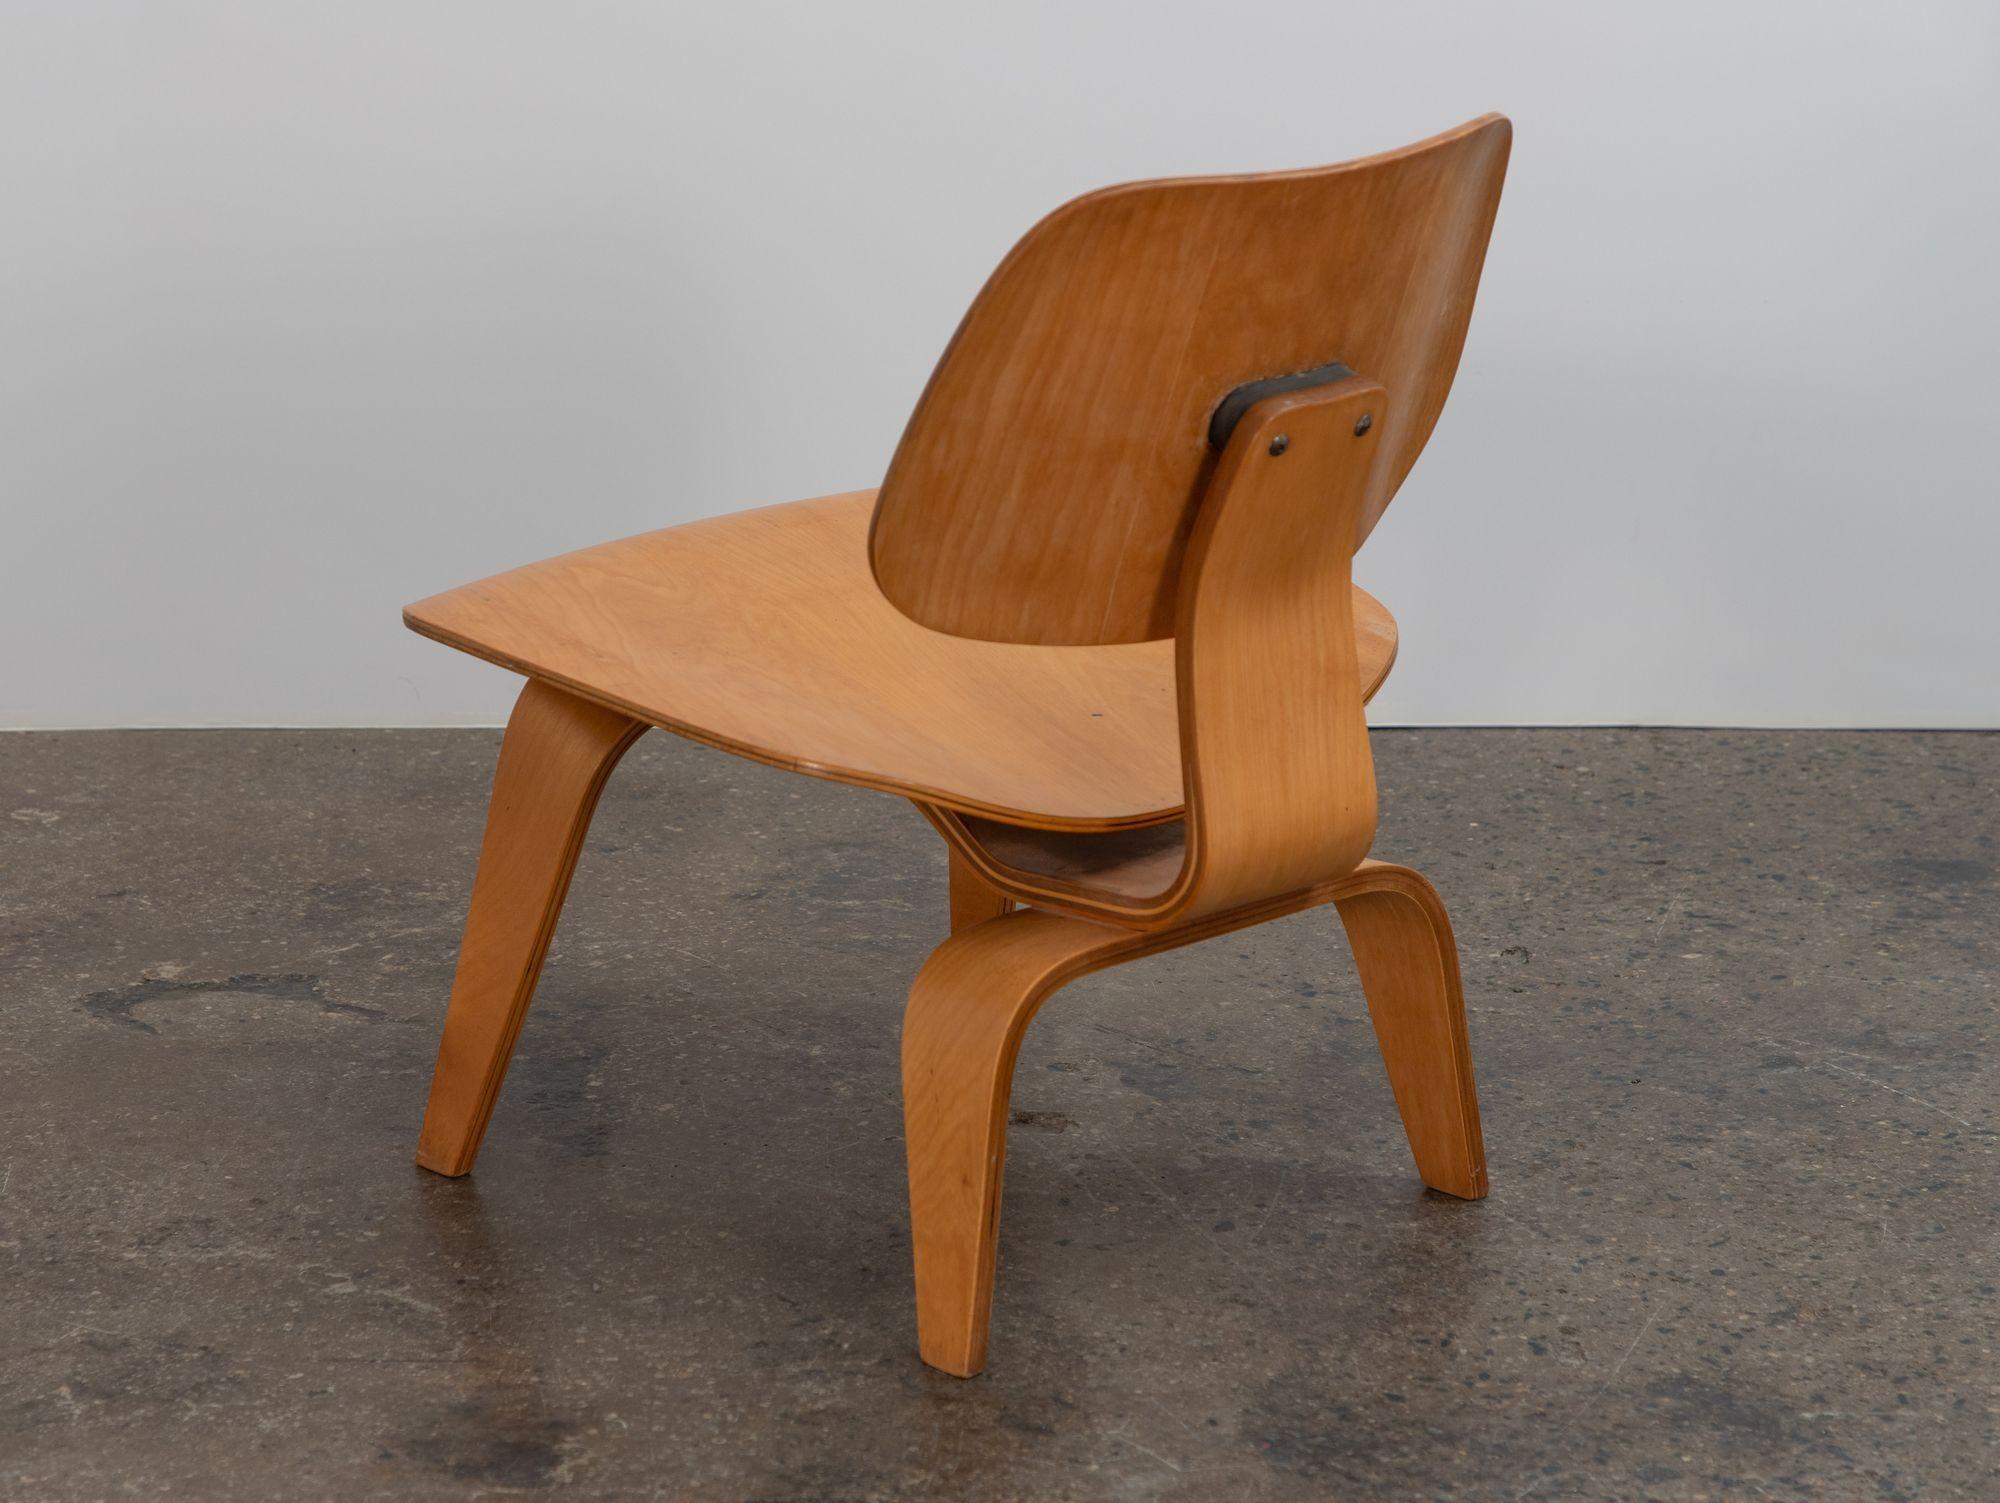 Original LCW lounge chair in birch, designed by Charles and Ray Eames for Herman Miller. Molded plywood with a low-slung profile. Legs and seat edges are very clean with no major chips. Structurally sound--shock mounts are stable and secure. Nice